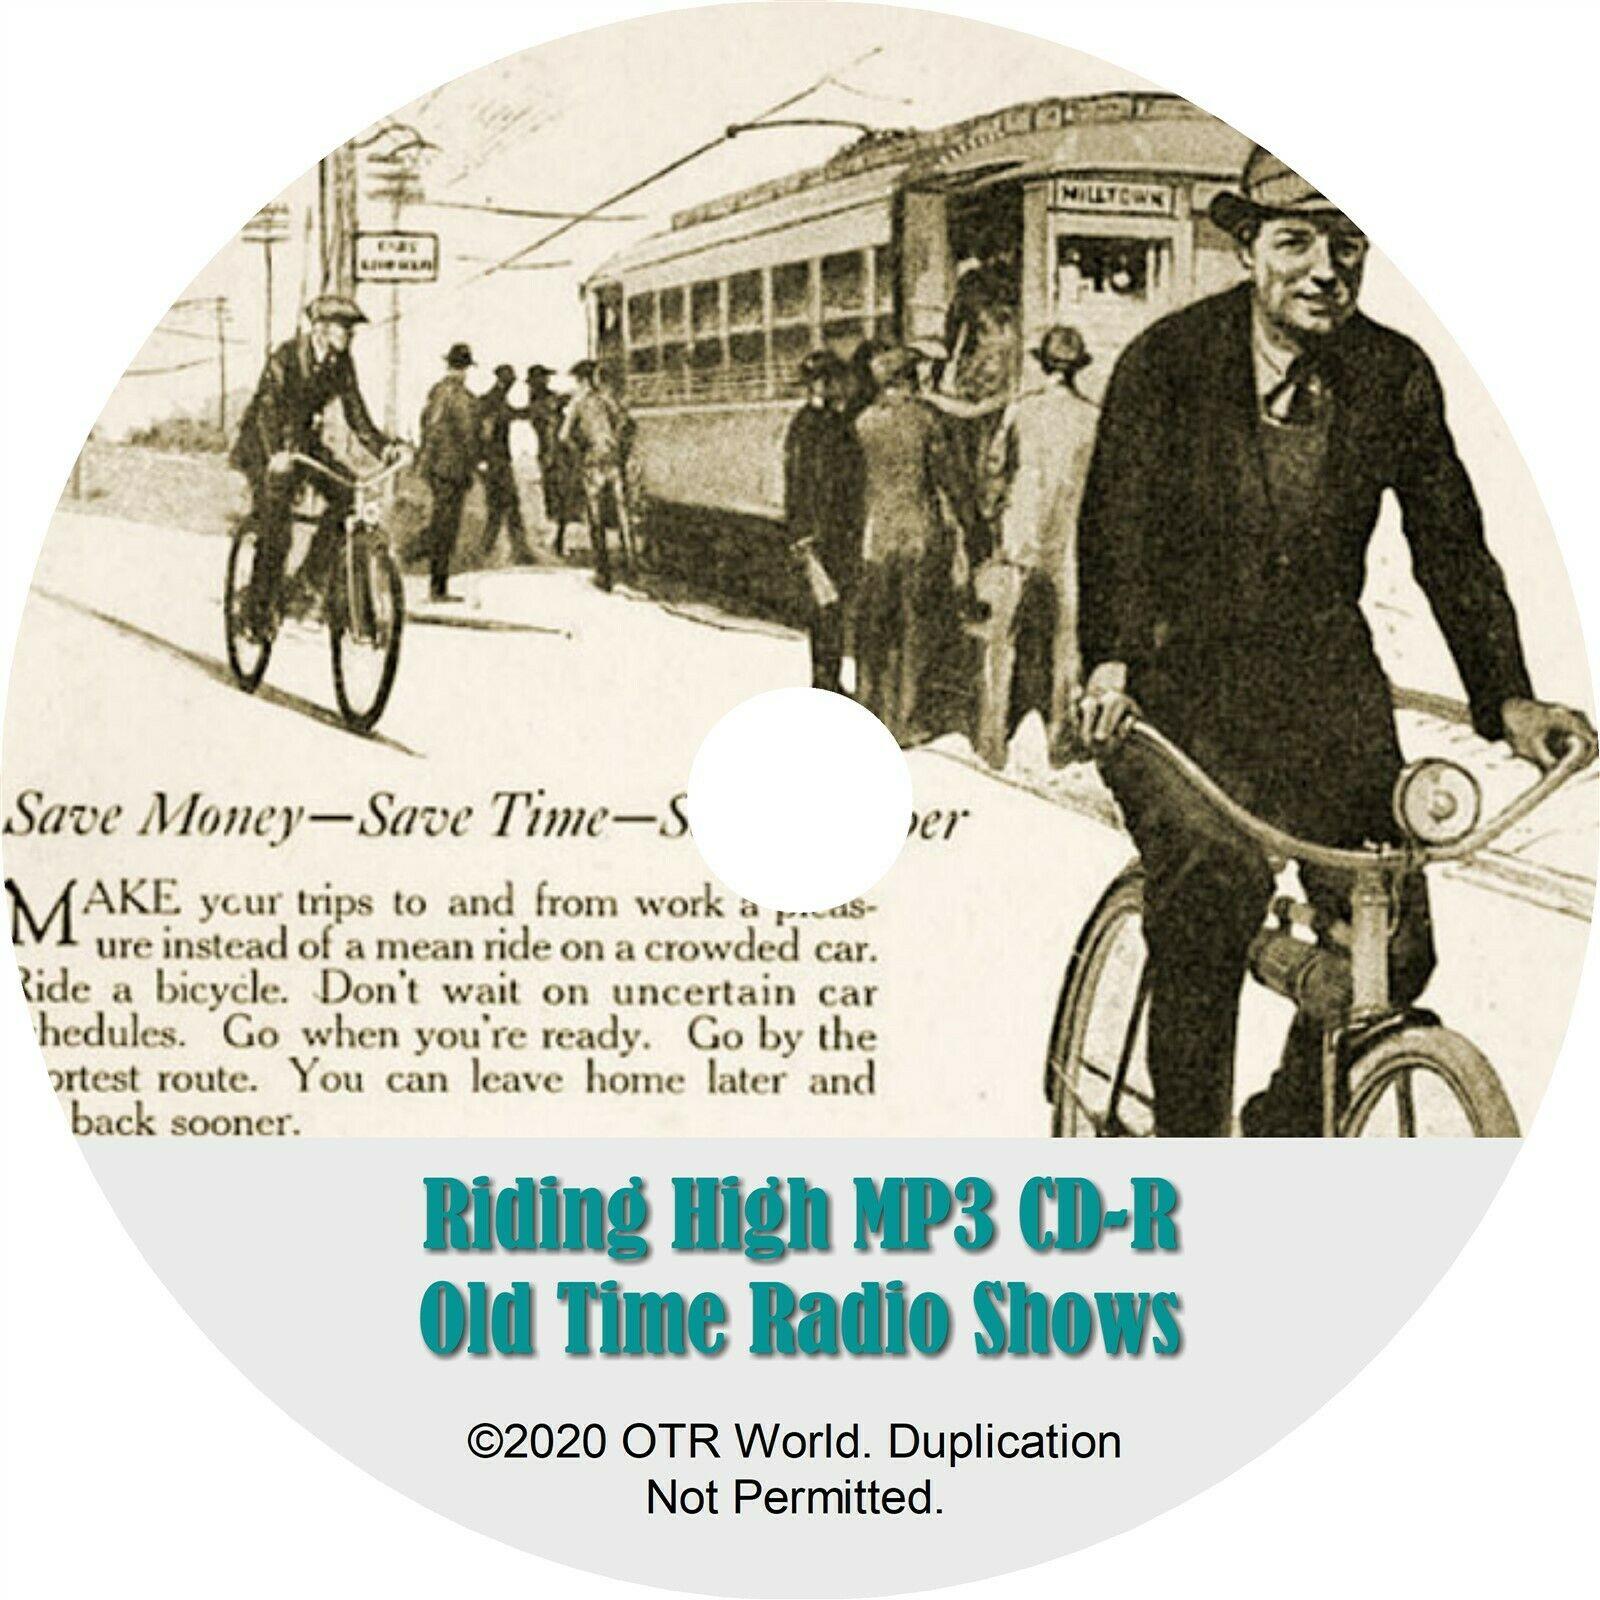 Riding High OTR Old Time Radio Shows MP3 On CD-R 12 Episodes